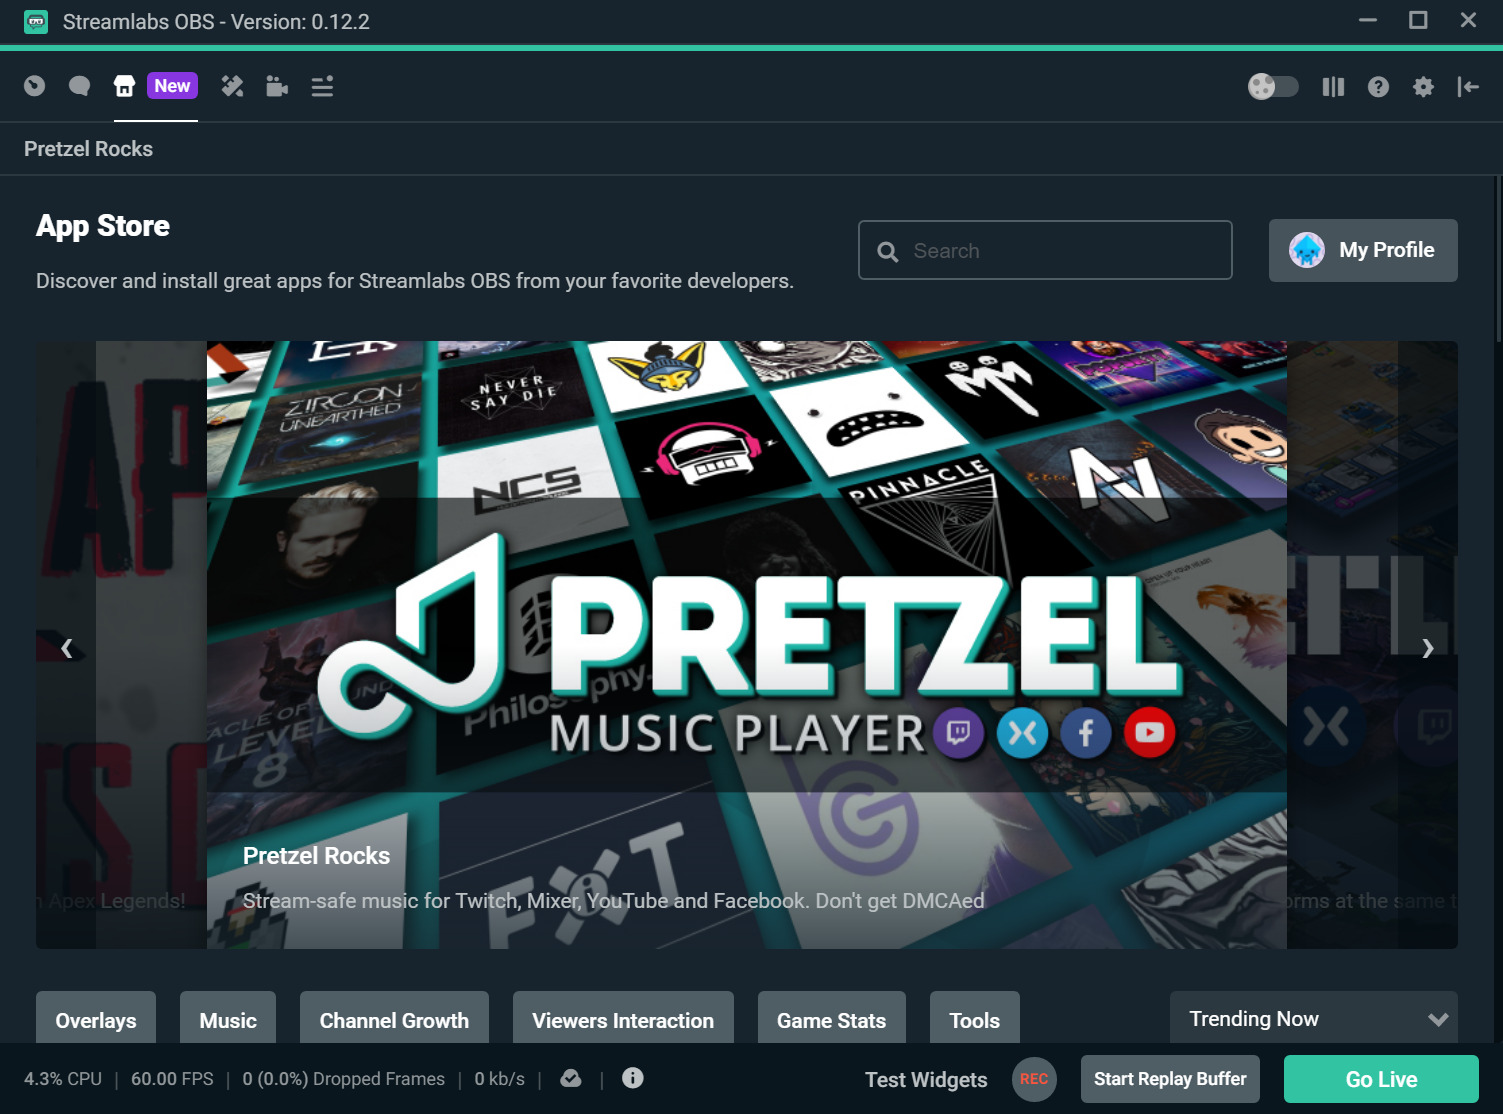 pretzel.zendesk.comhcarticle_attachments360030001094Streamlabs_OBS_3_28_2019_4_13_06_PM.jpg